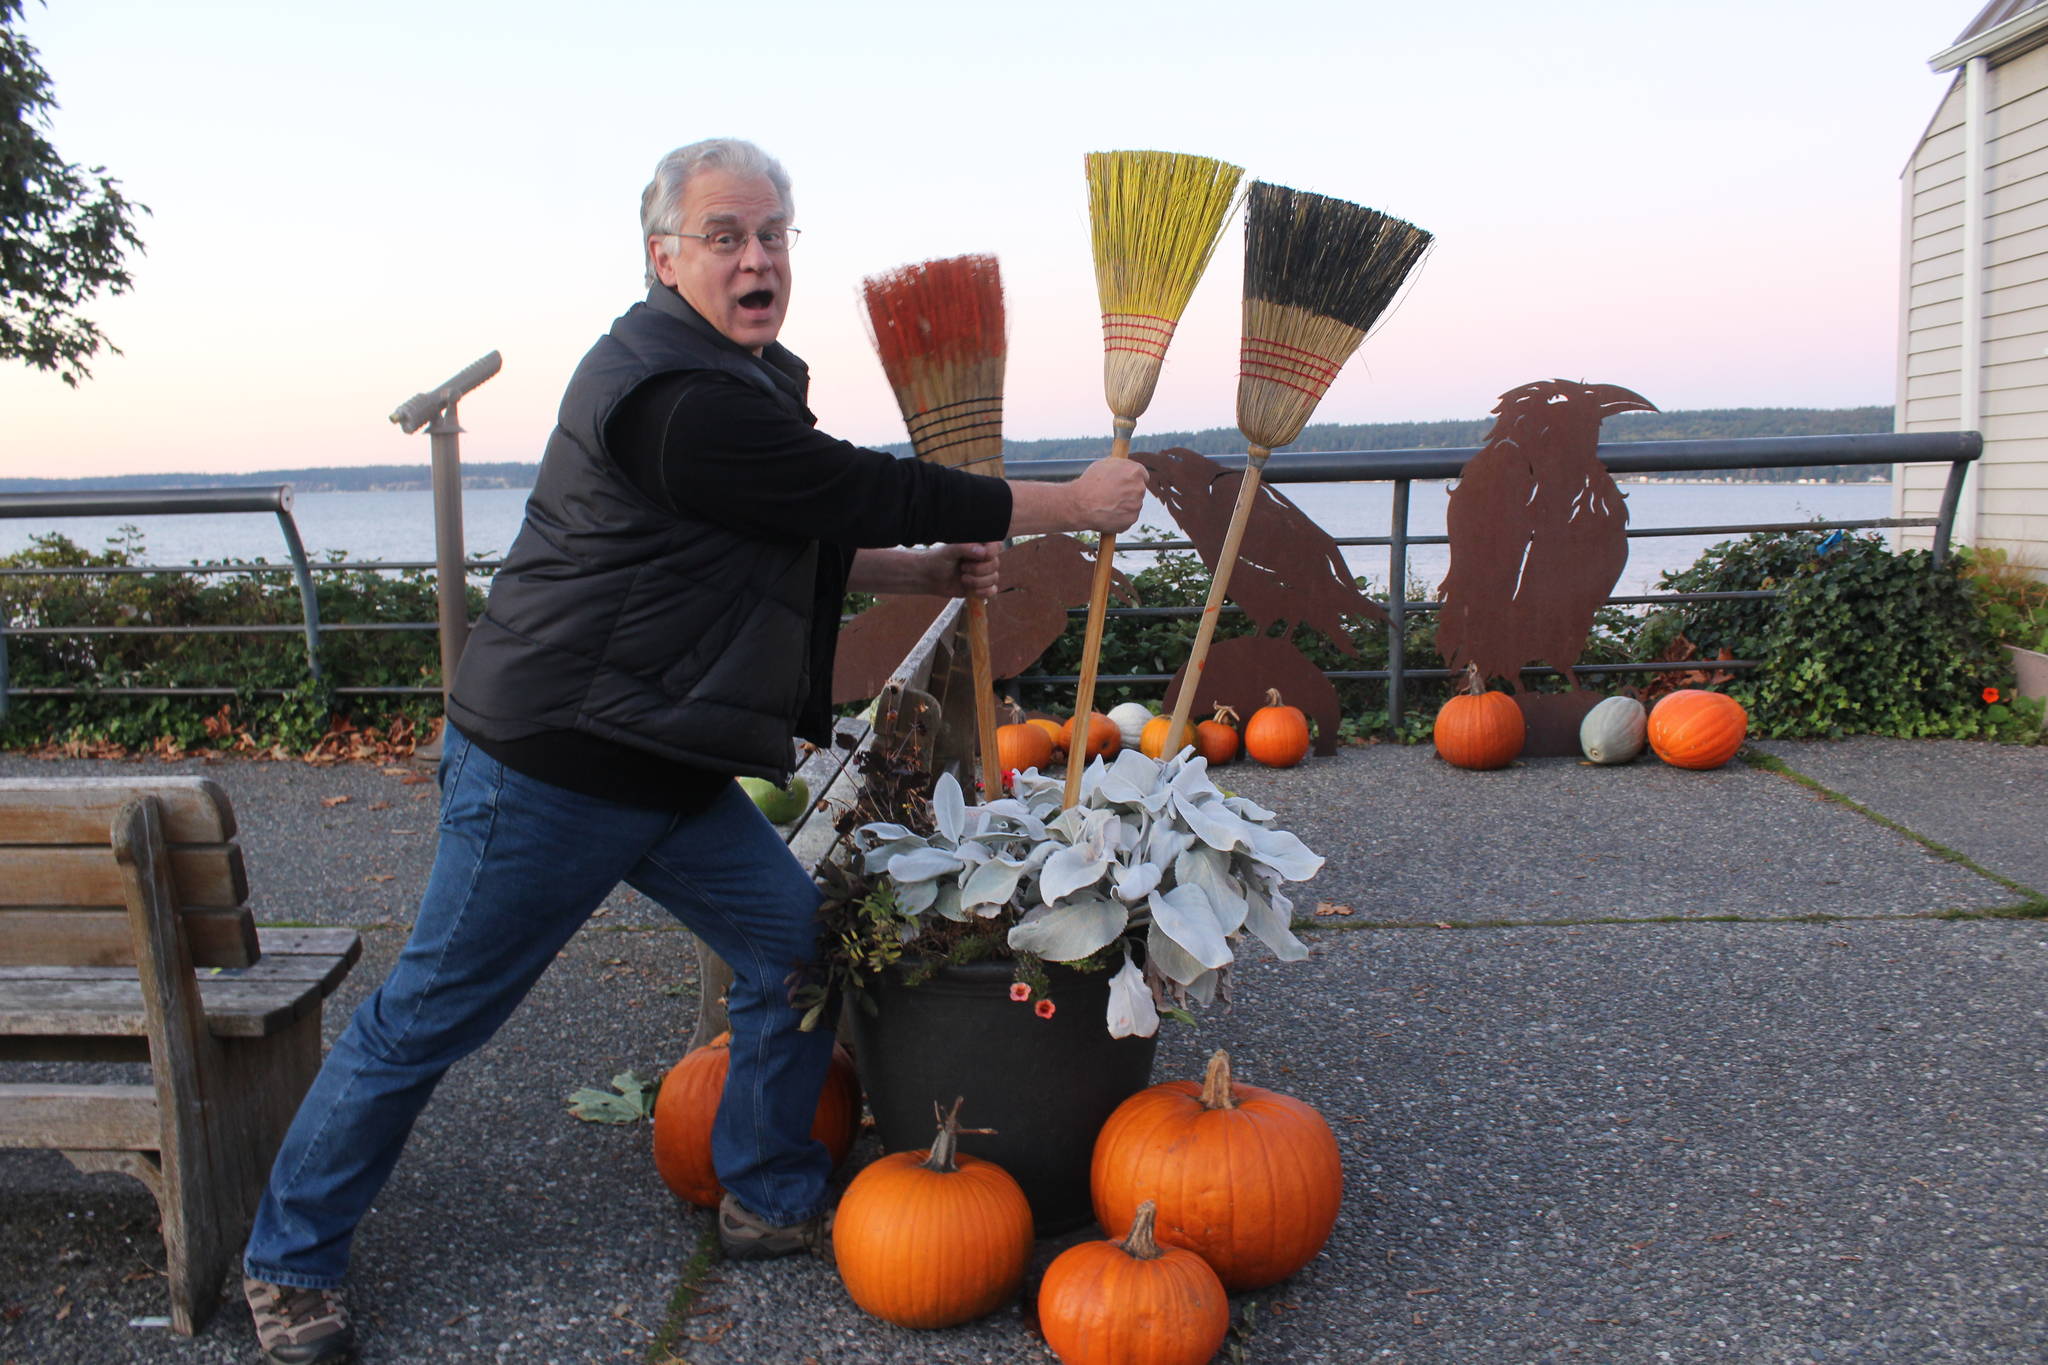 Tom Bindus from Coupeville feels the broomstick magic on 1st Street in Langley, Oct. 9, 2019. Photo by Wendy Leigh / South Whidbey Record                                Tom Bindus from Coupeville feels the broomstick magic on 1st Street in Langley, Oct. 9, 2019. Photo by Wendy Leigh / South Whidbey Record                                Tom Bindus from Coupeville feels the broomstick magic on 1st Street in Langley, Oct. 9, 2019. Photo by Wendy Leigh / South Whidbey Record